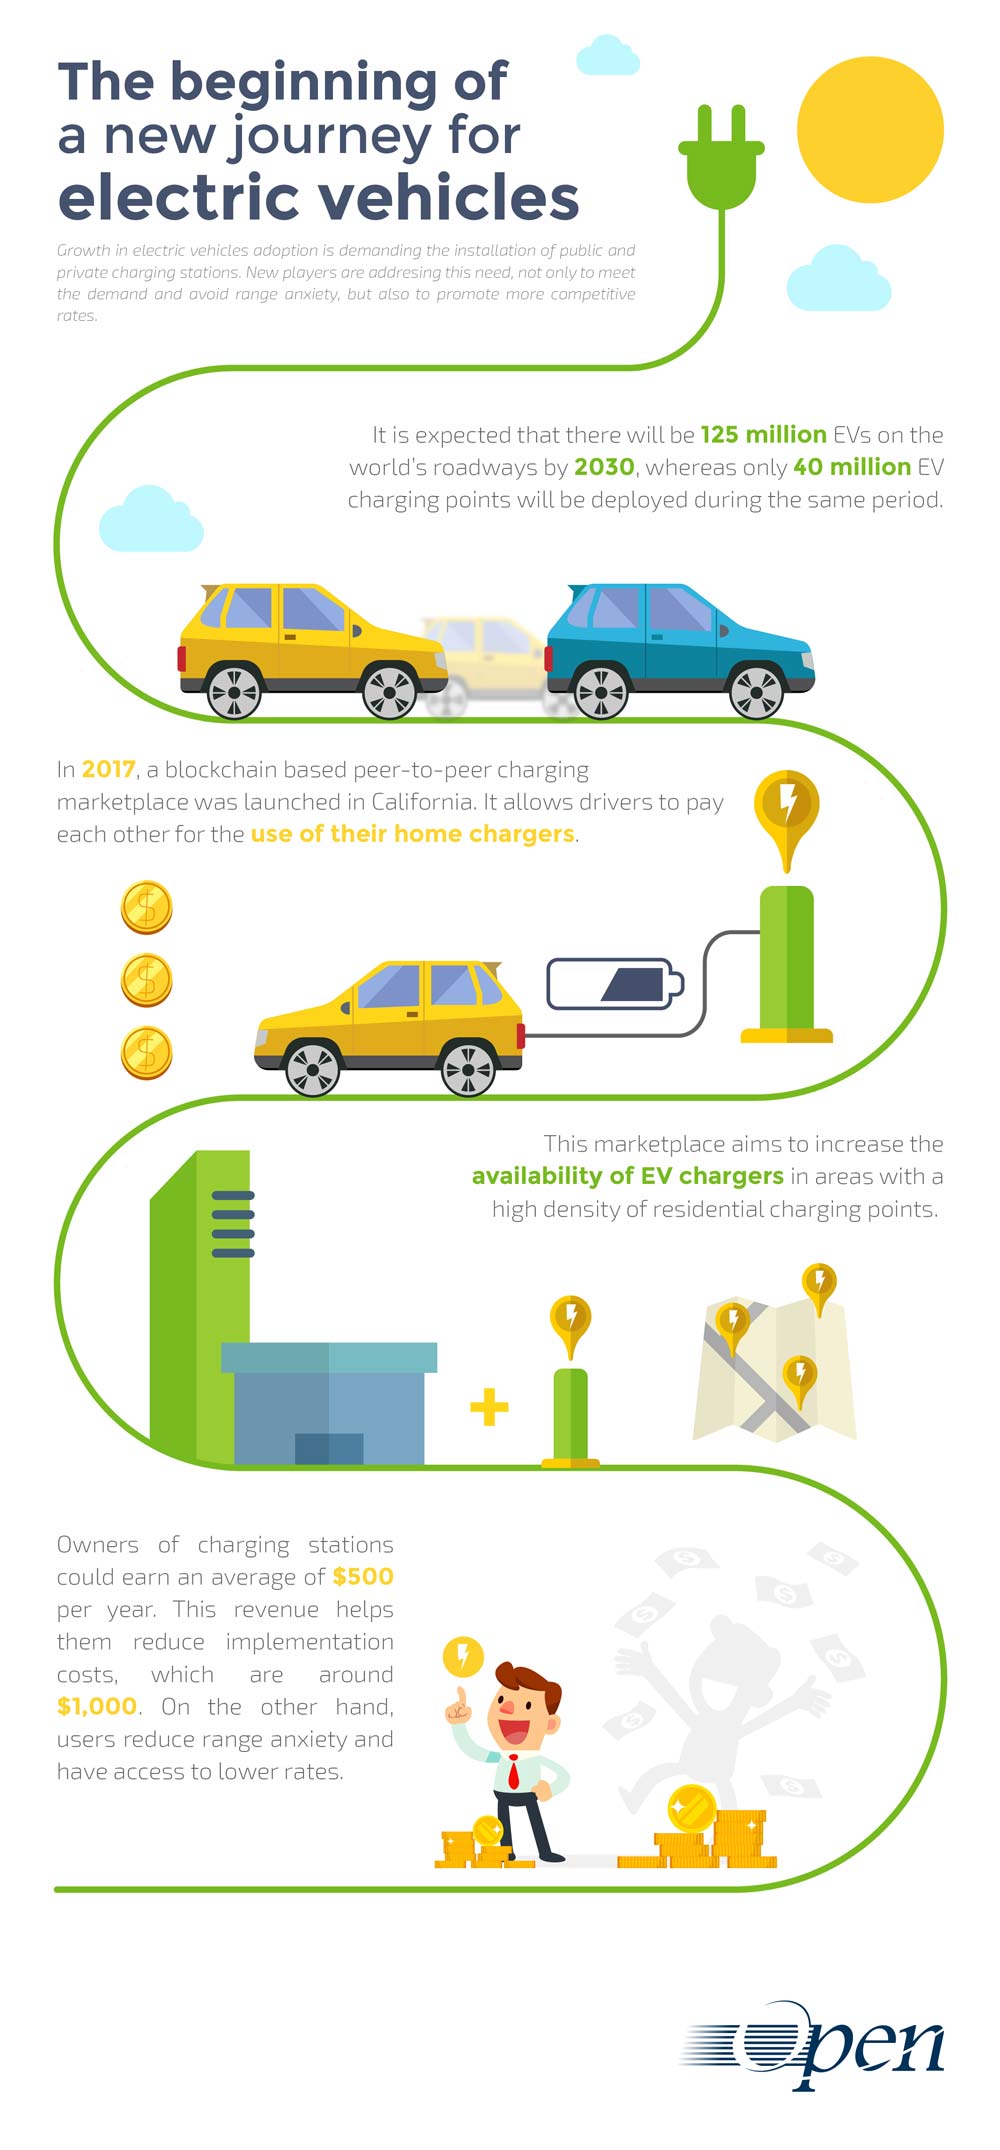 Electric vehicles: the beginning of a new journey